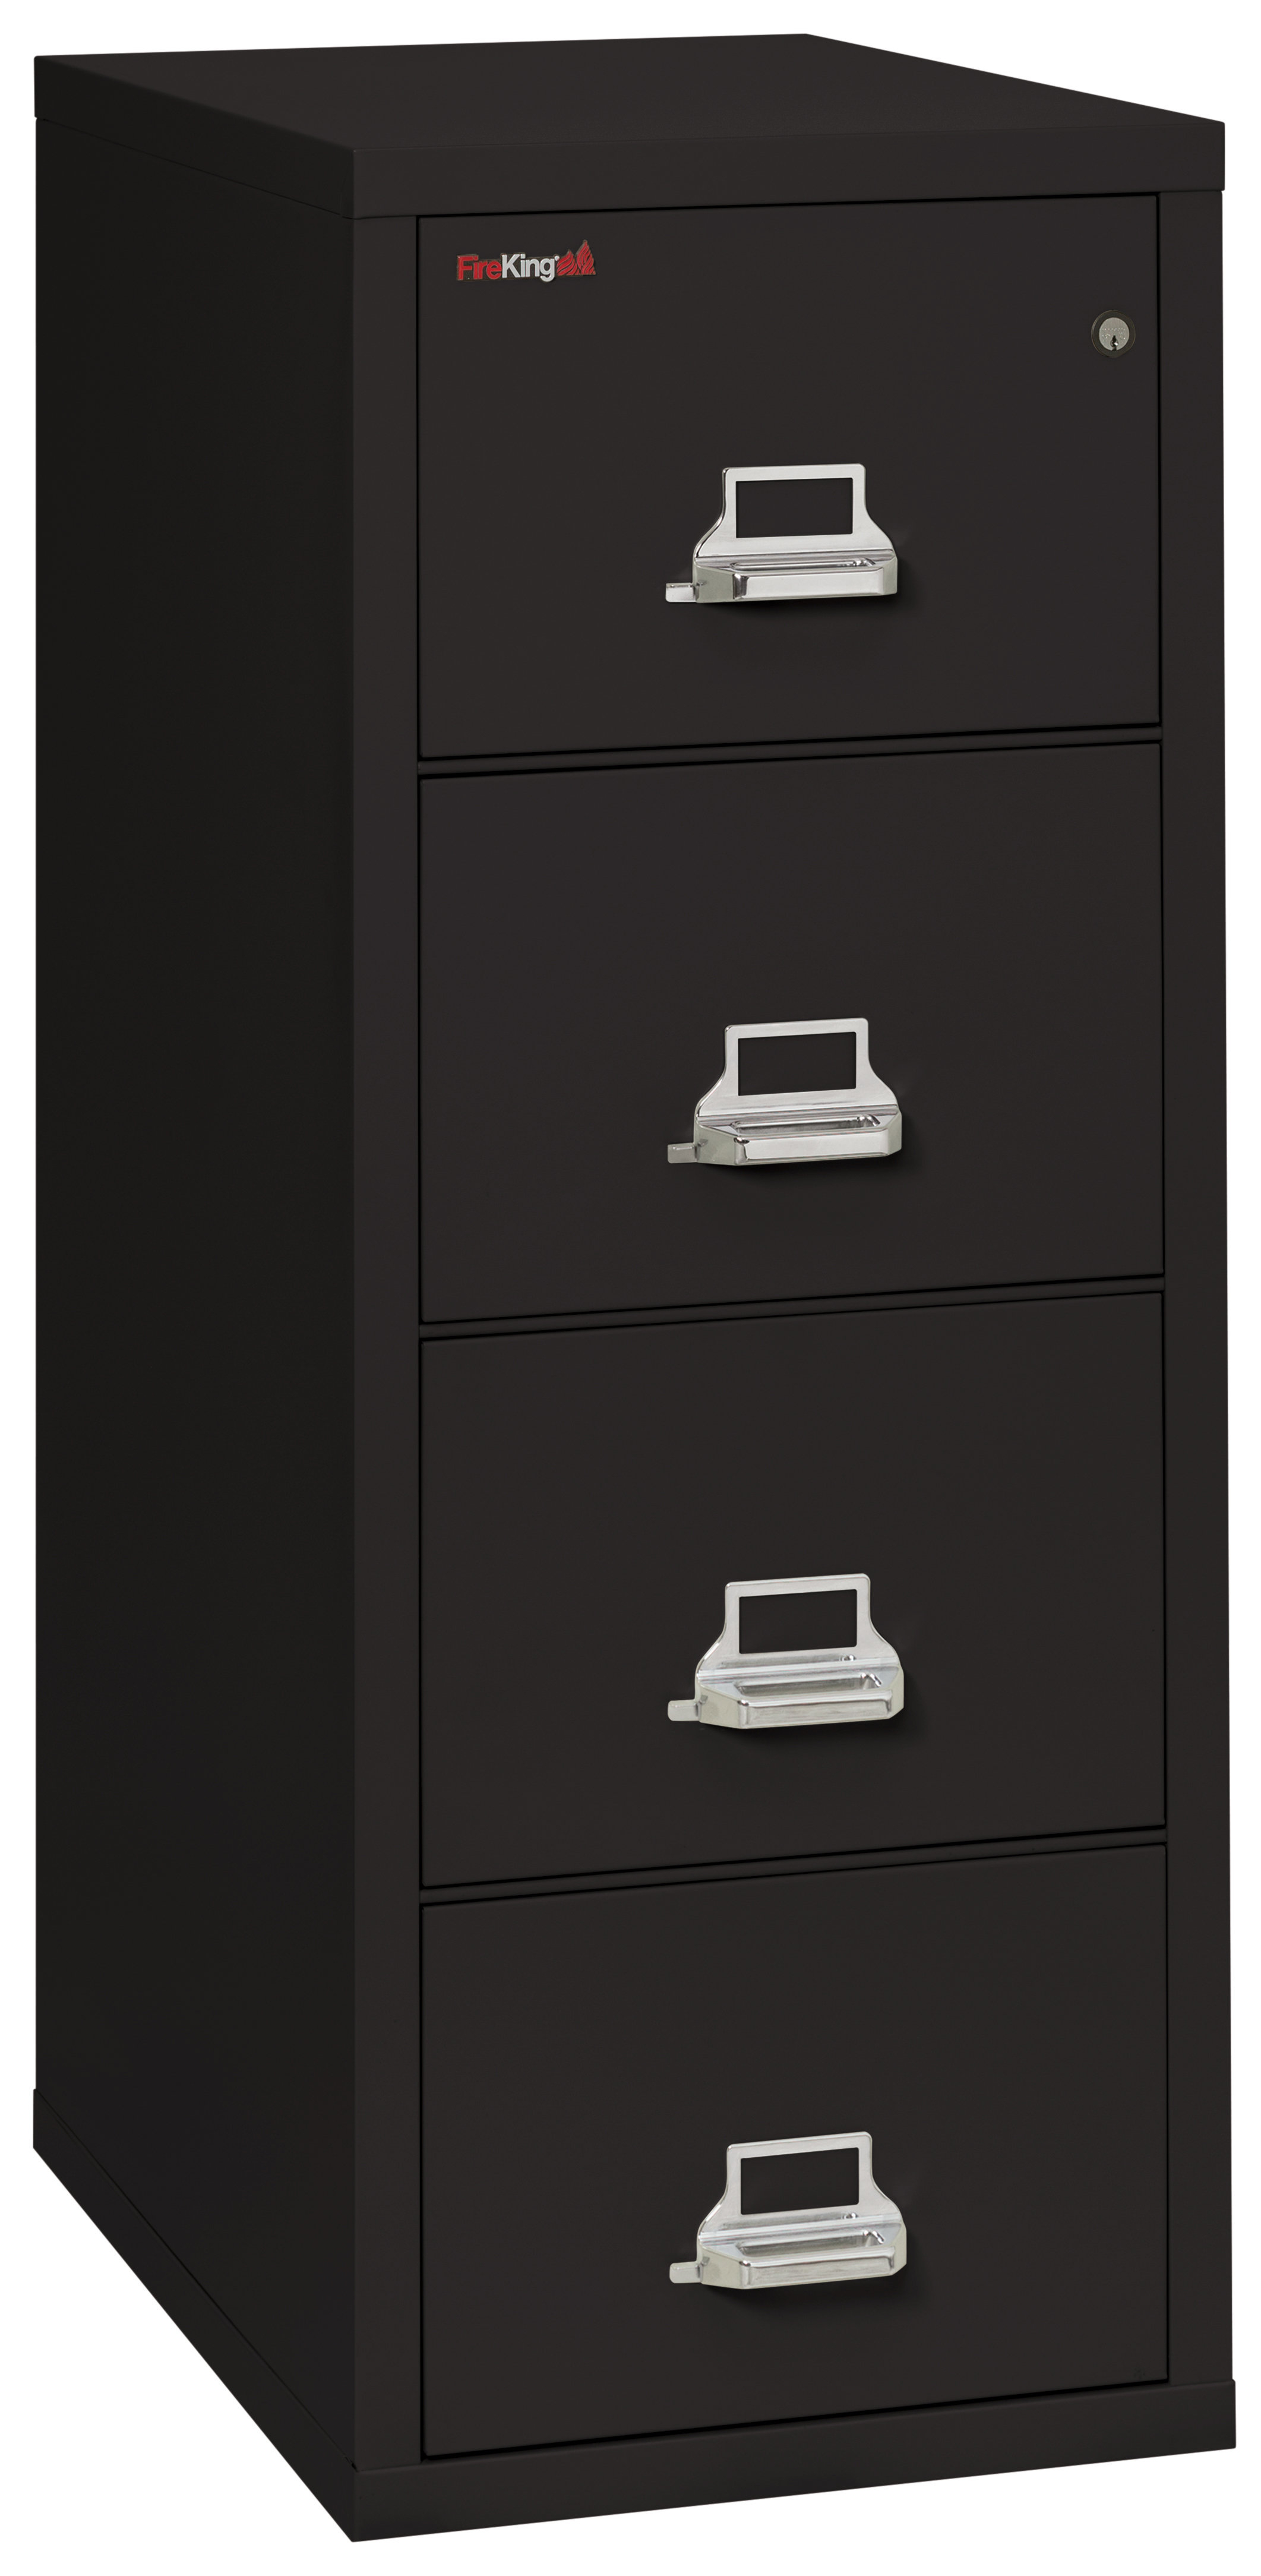 Fireking Fireproof 4 Drawer Vertical File Cabinet Wayfair within dimensions 2123 X 4336